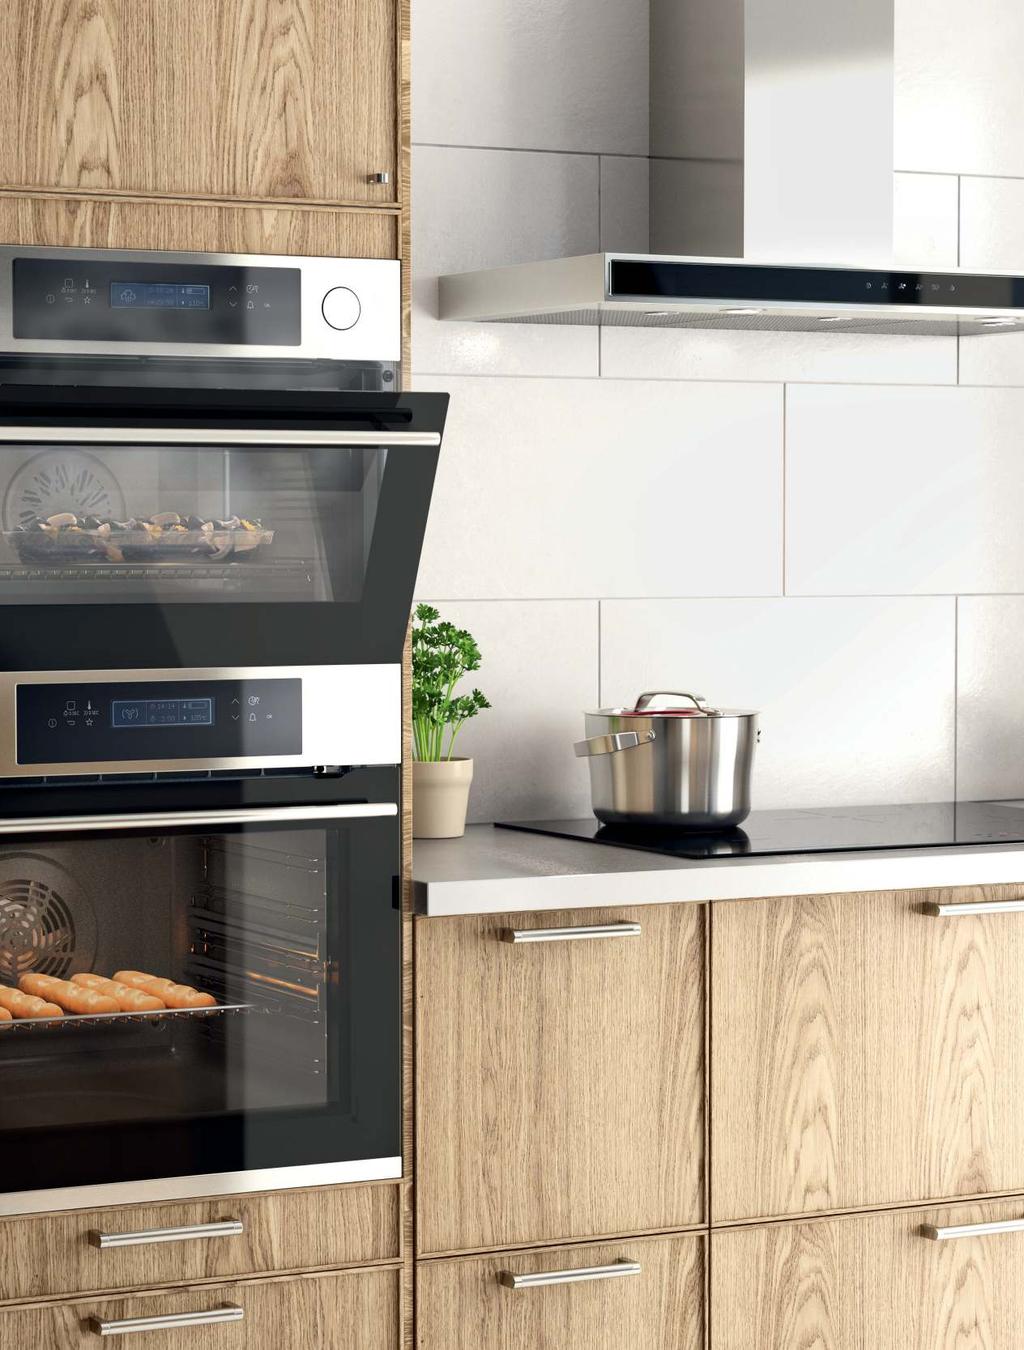 FIND YOUR IDEAL SET OF APPLIANCES. Getting a new kitchen involves some decisions. What style are you looking for? What do you need your appliances to do? Can your taste match your wallet?